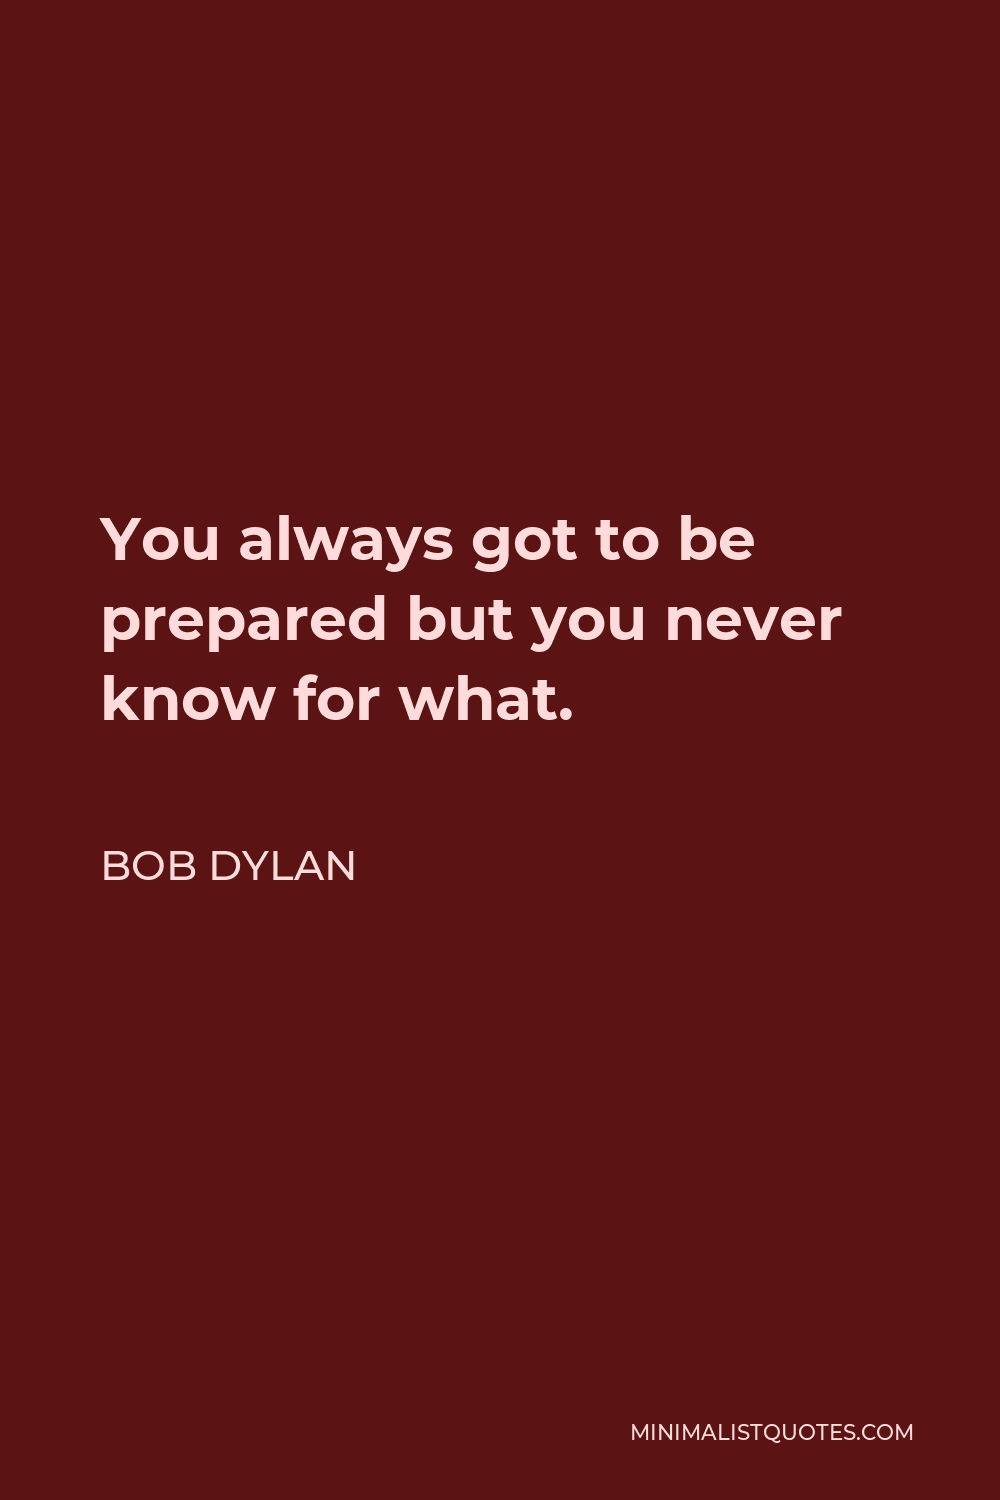 Bob Dylan Quote - You always got to be prepared but you never know for what.